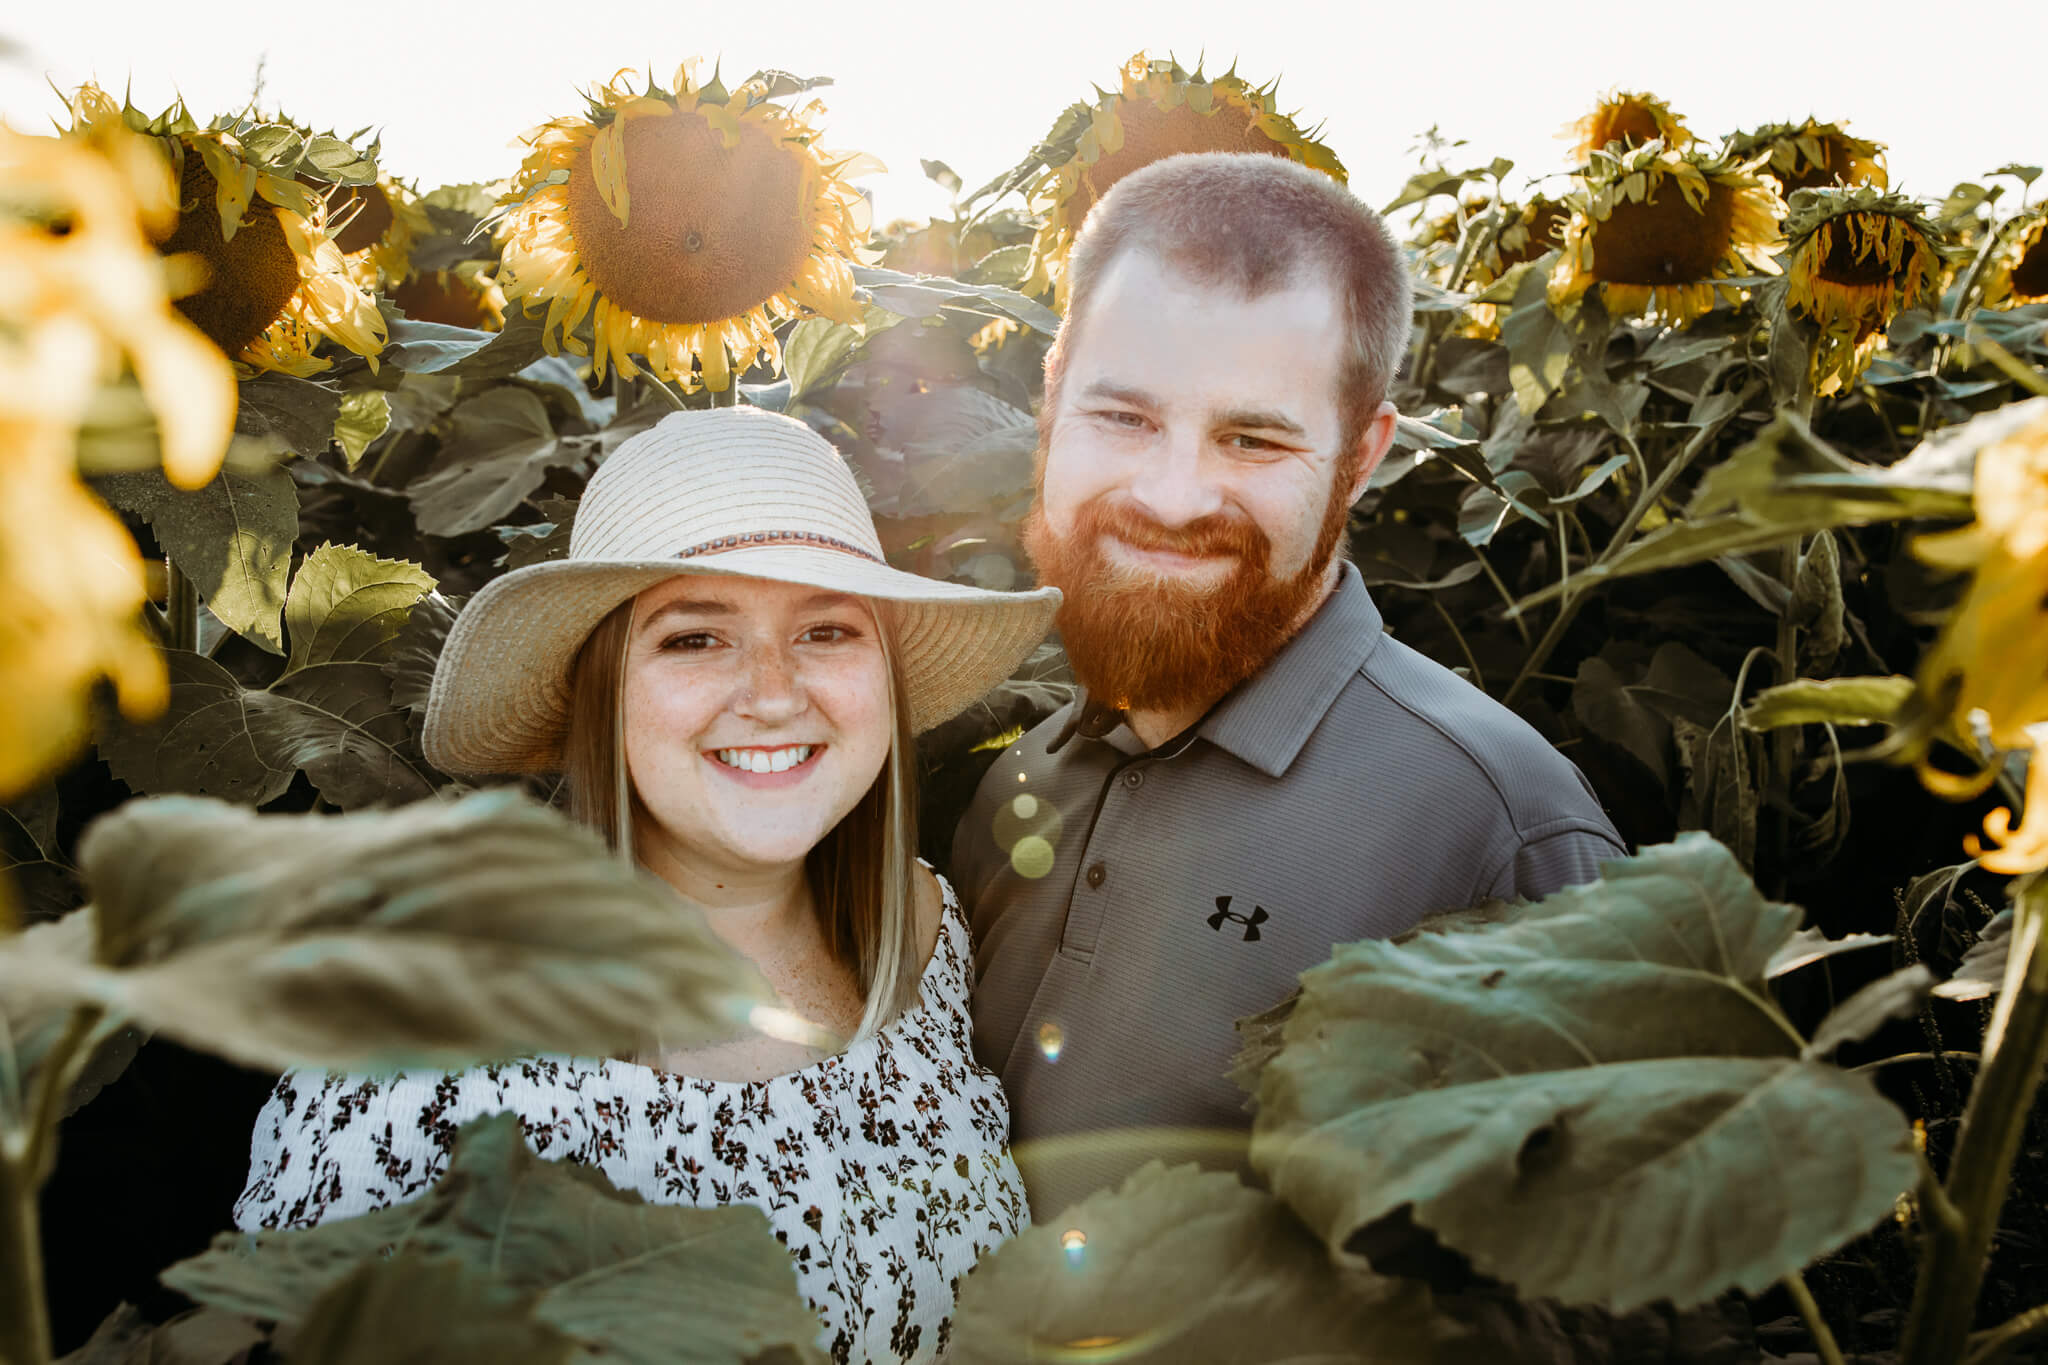 Couple in a sunflower field featured in a blog post about Appleton Nail Salons